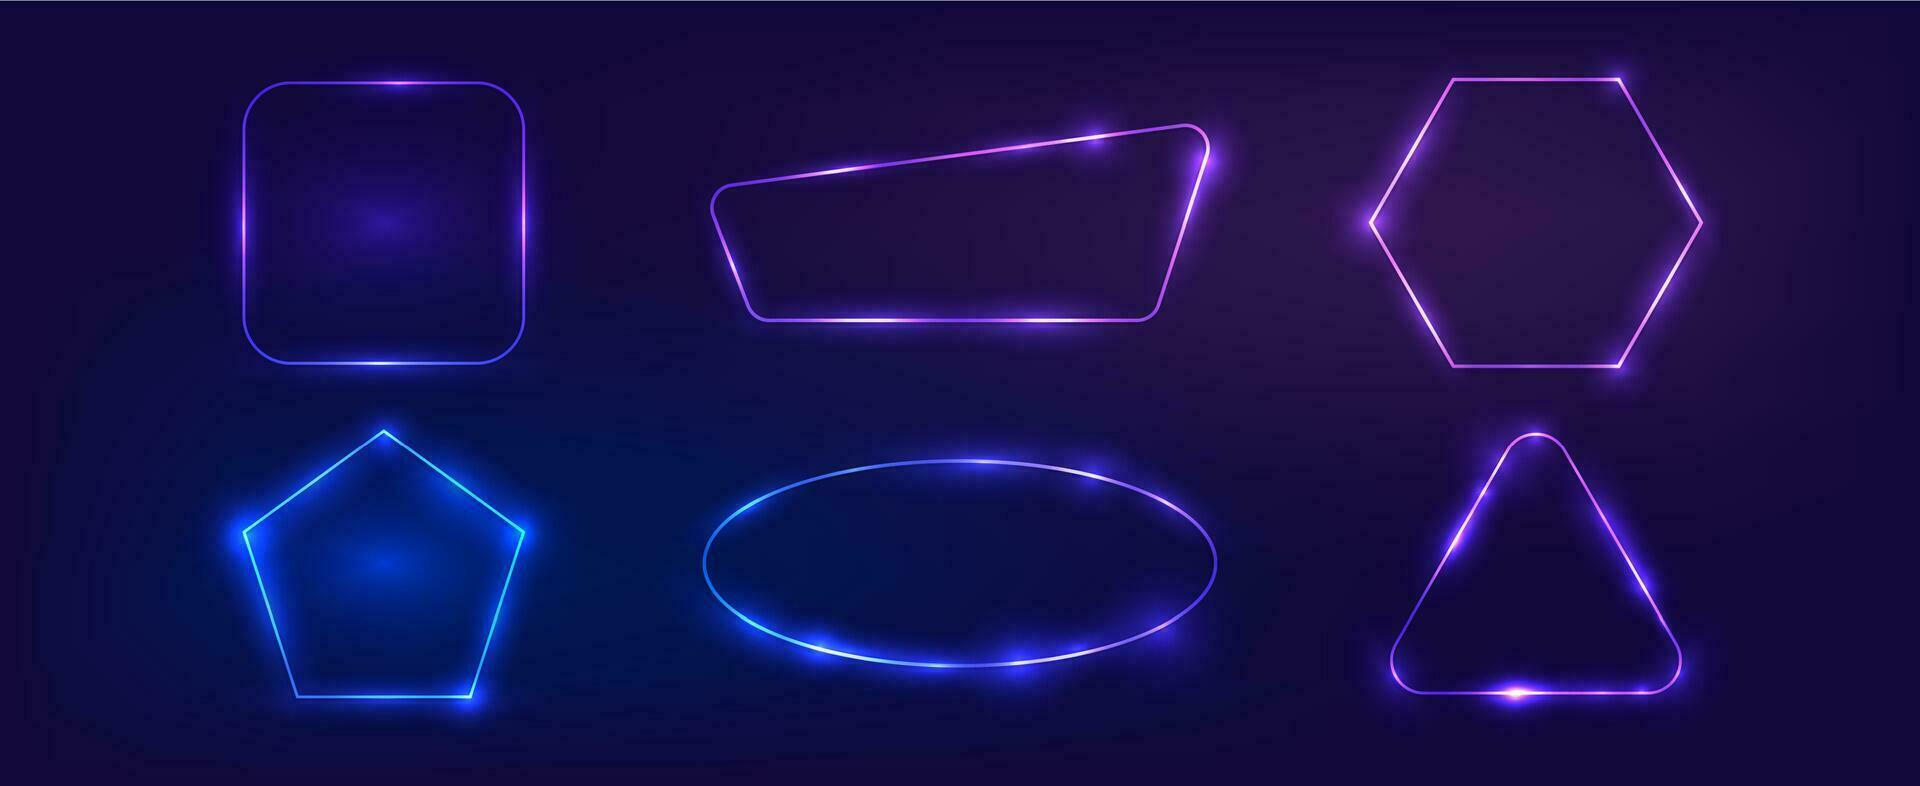 Set of six neon frames with shining effects vector